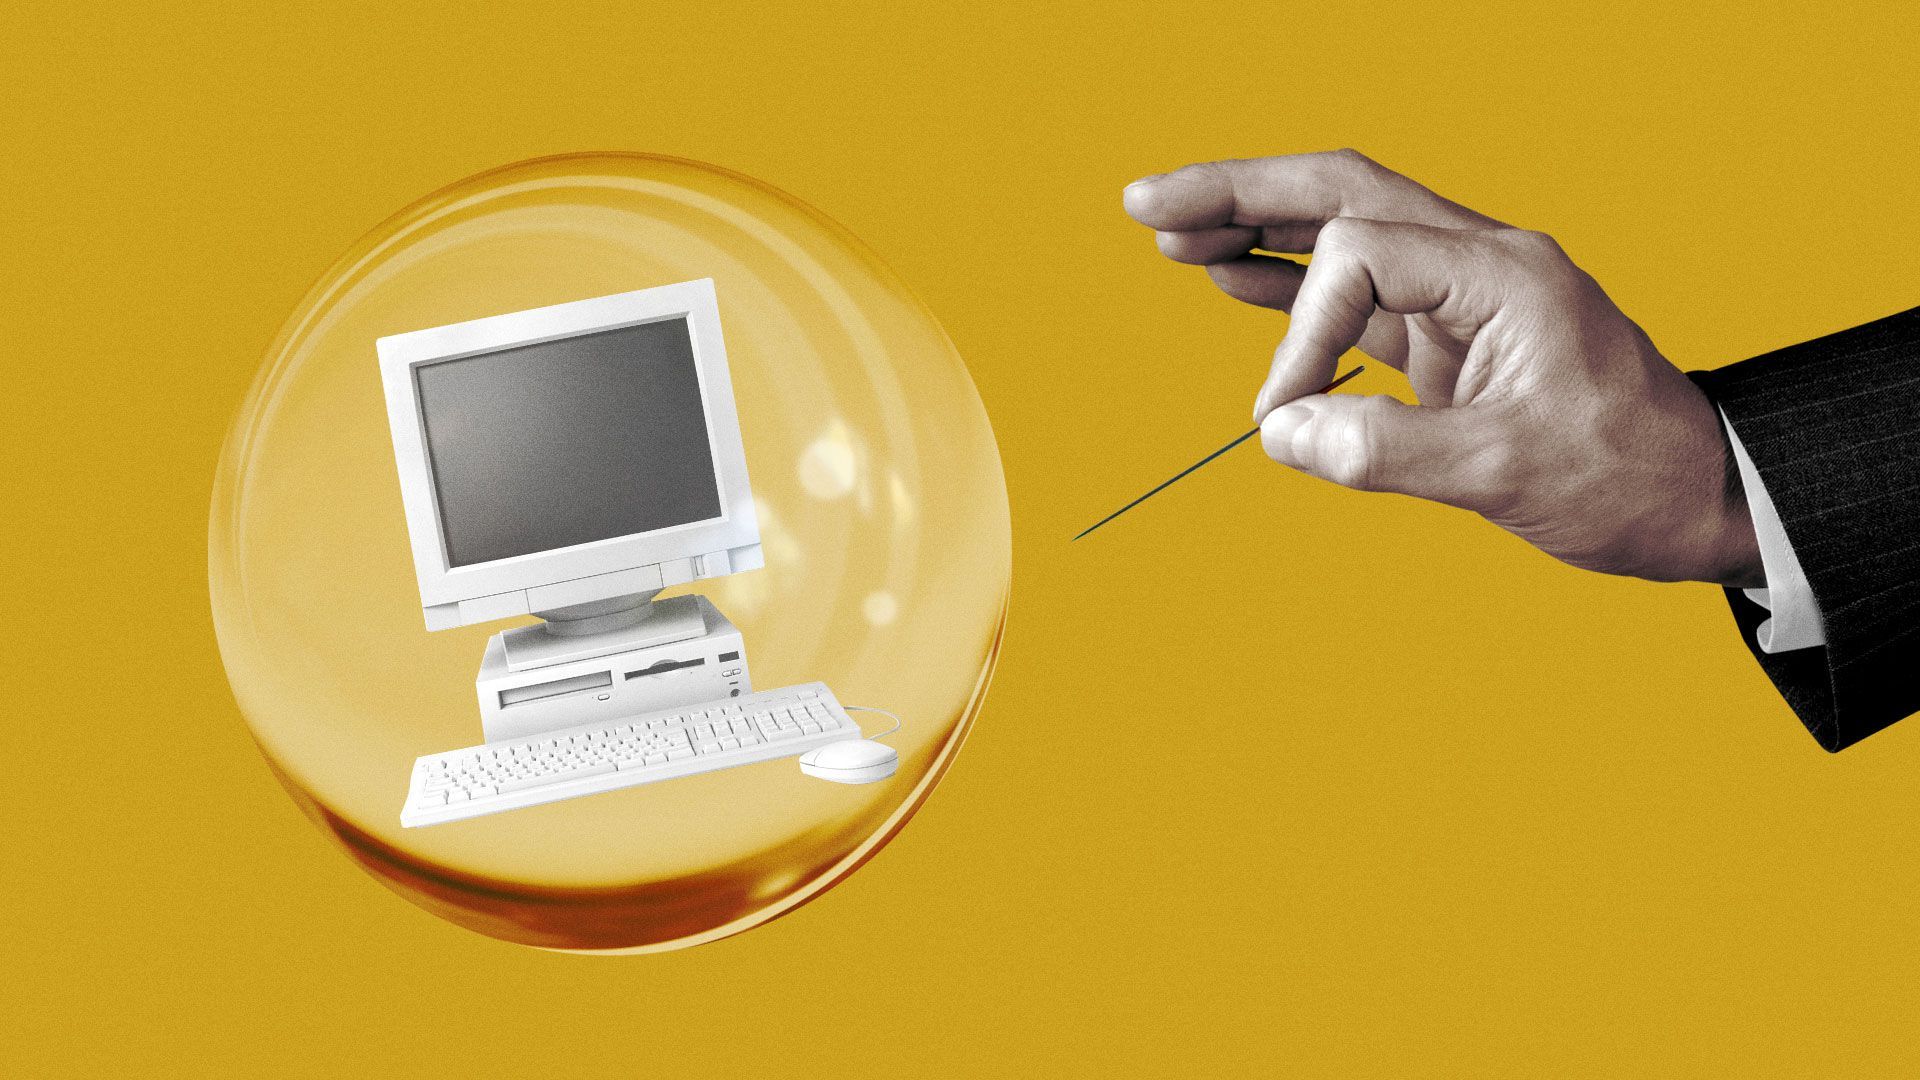 Illustration of hand about to pop a bubble with a computer